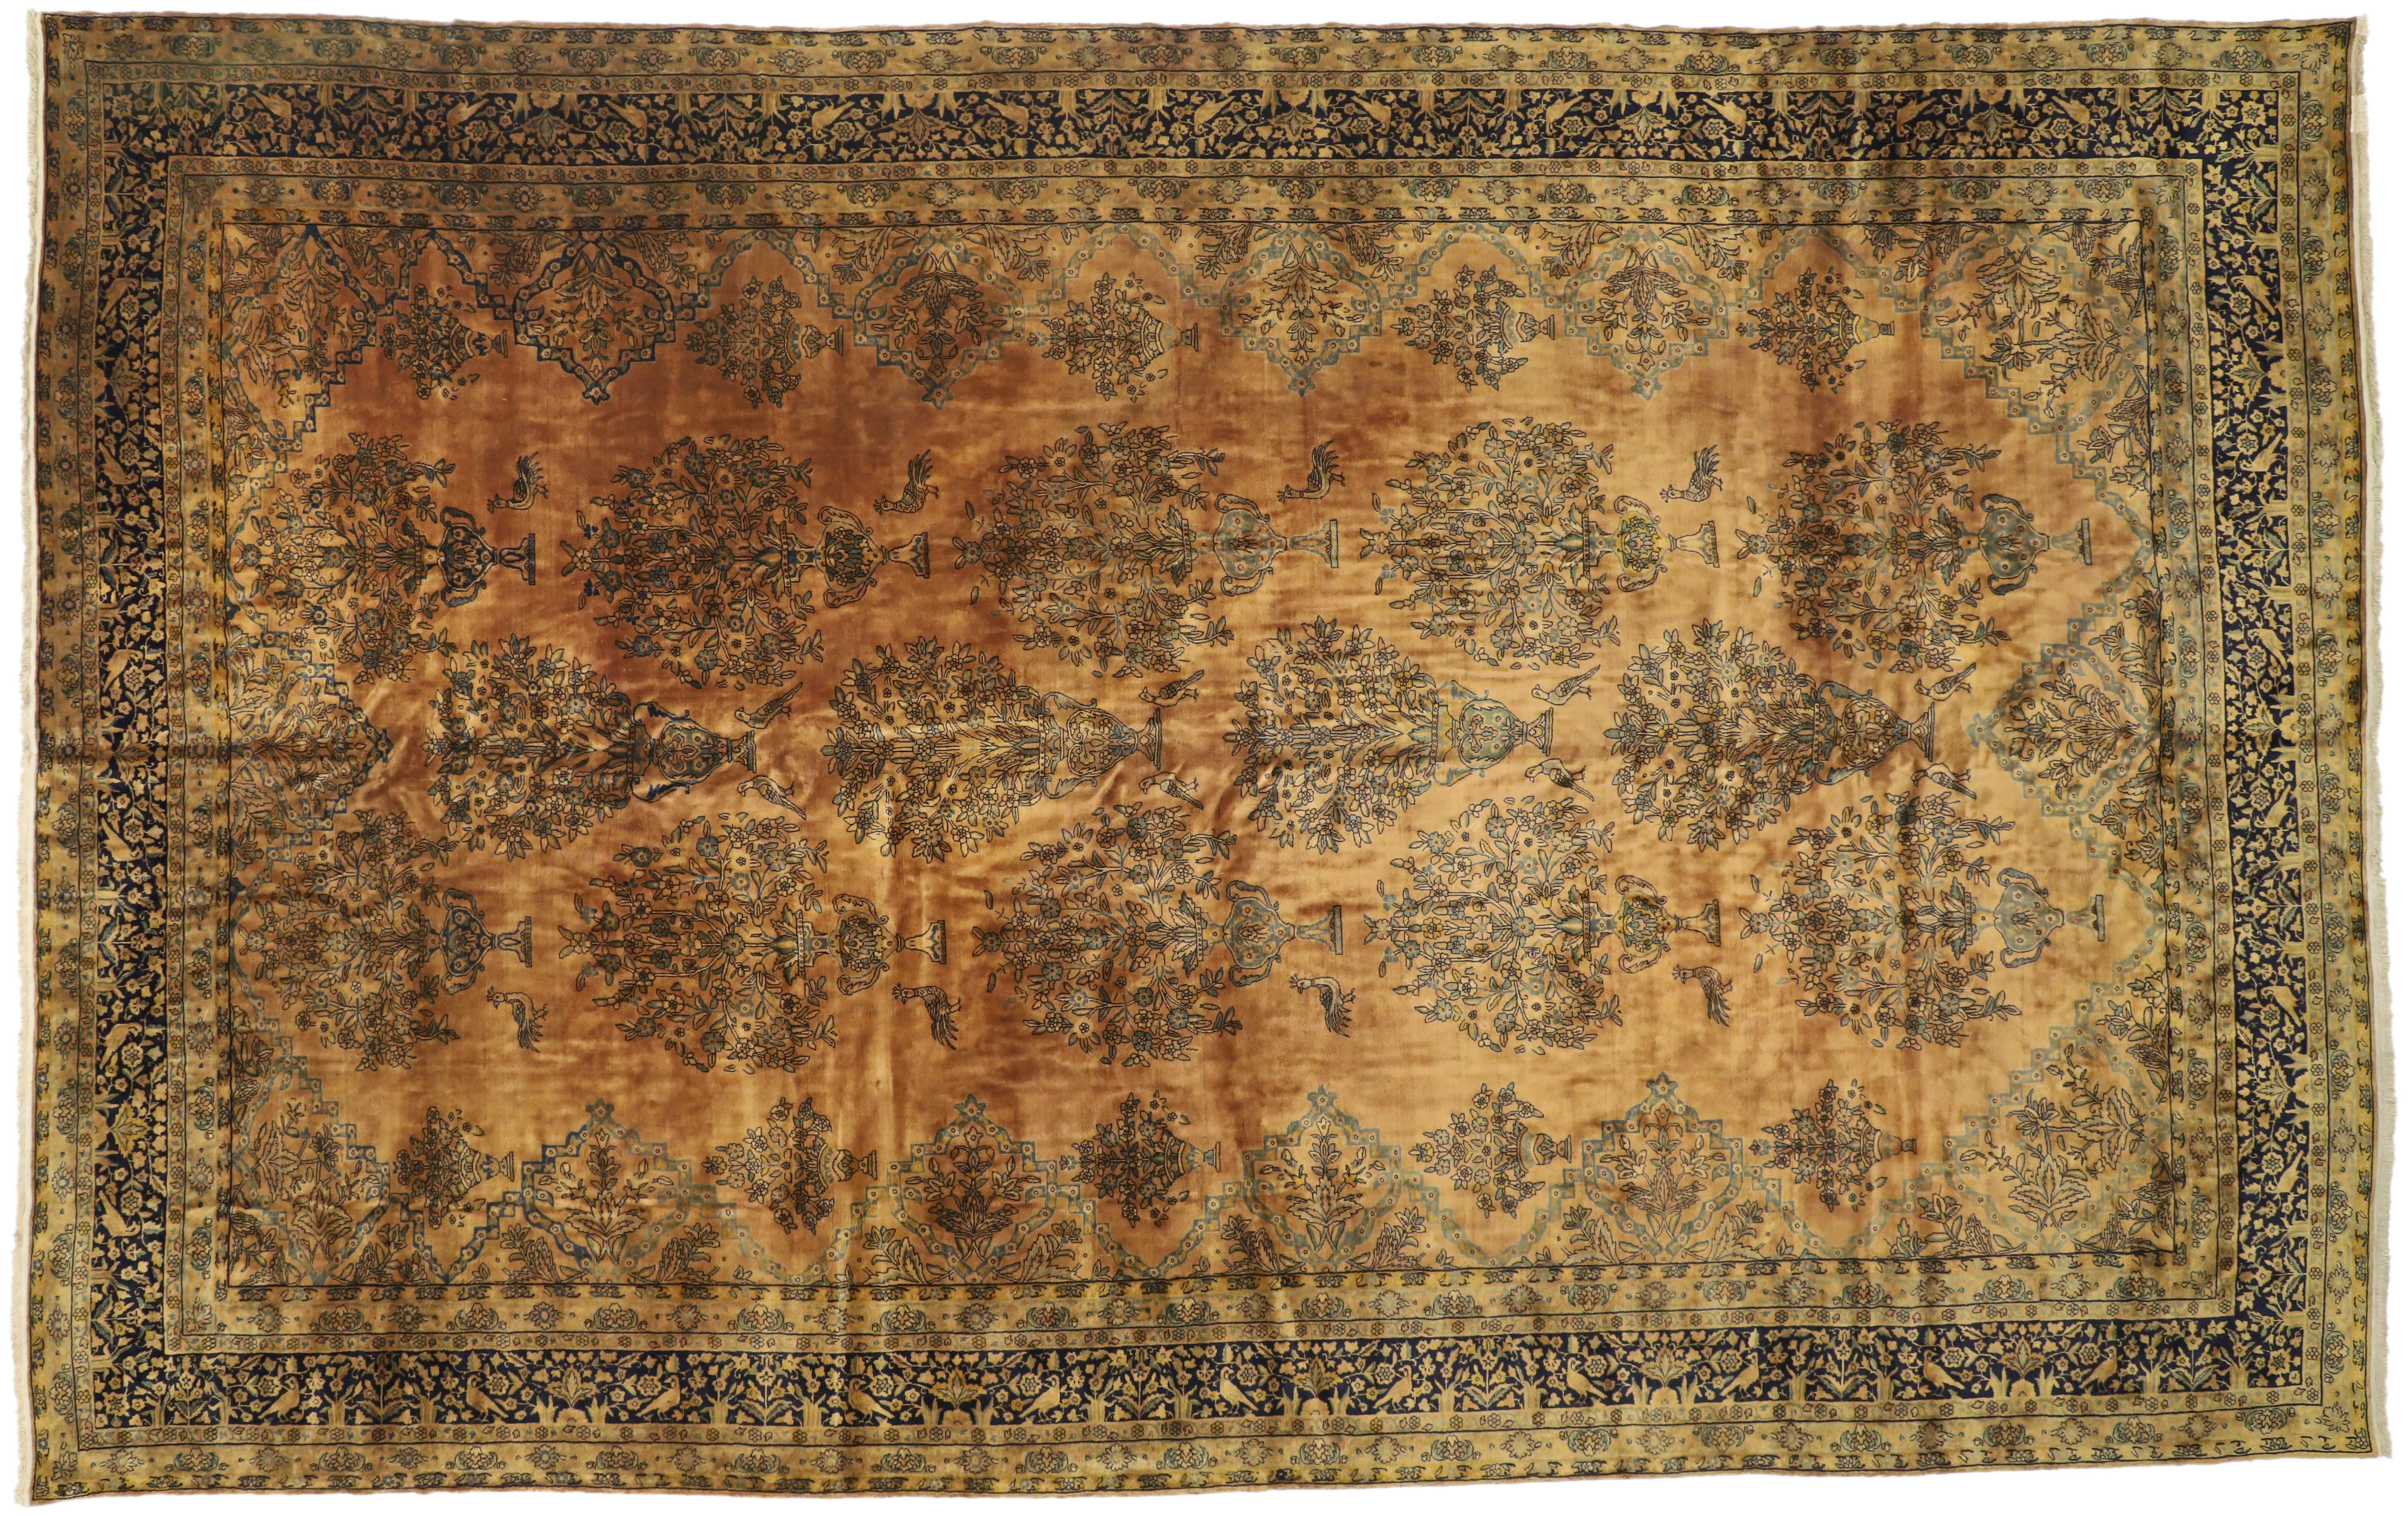 1880s Antique Persian Kashan Rug Kork Manchester Wool, Hotel Lobby Size Carpet In Good Condition For Sale In Dallas, TX